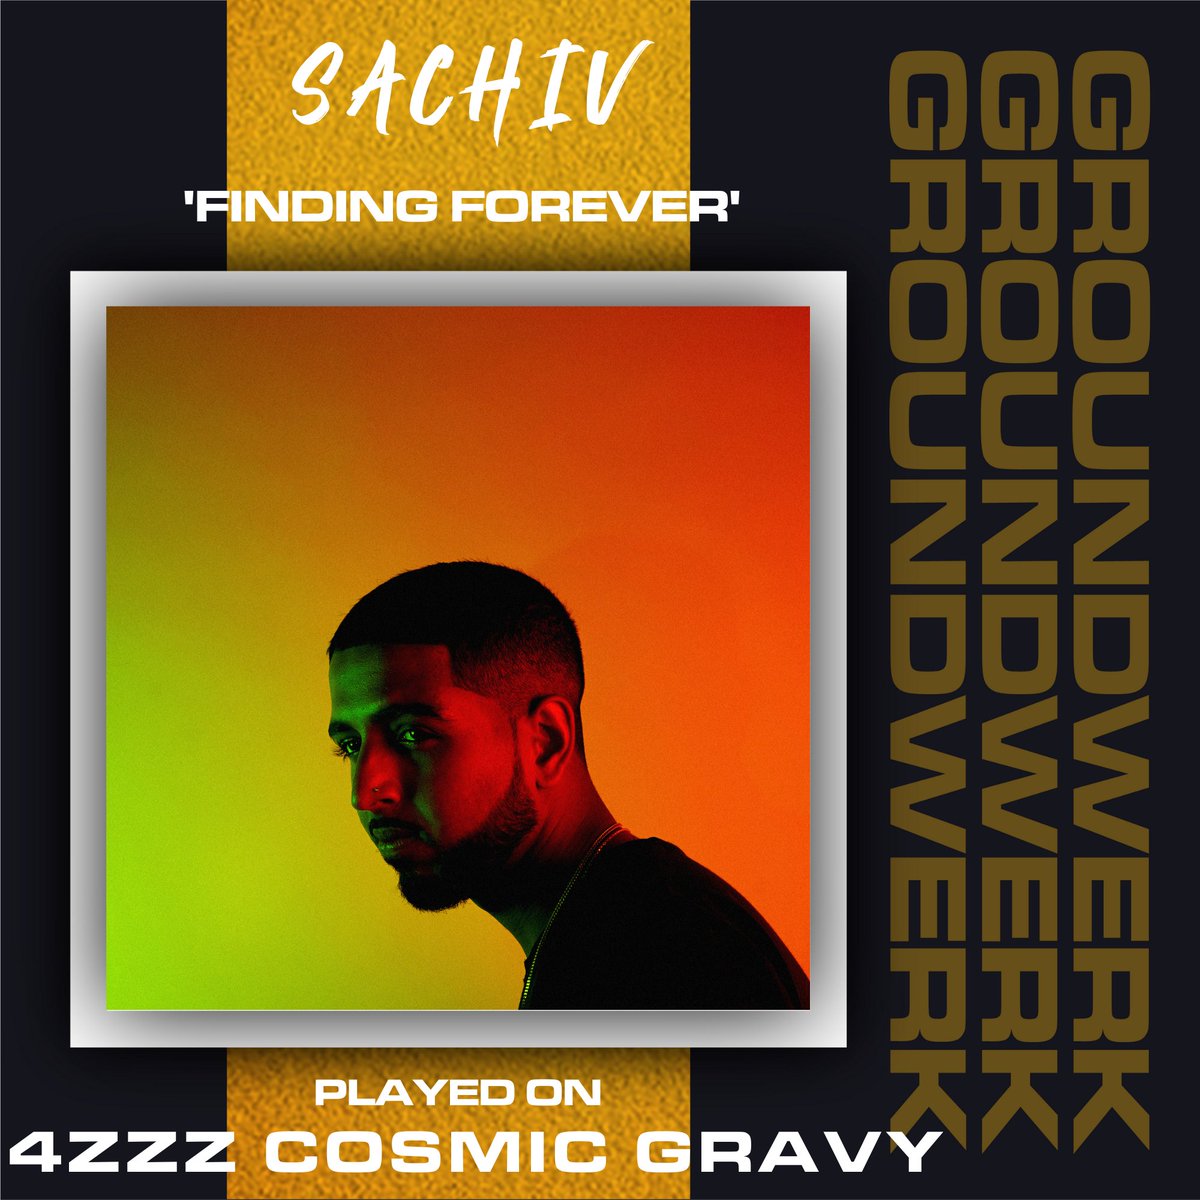 Big thanks to the team at 4ZZZ Cosmic Gravy for adding SACHIV's new EP 'Finding Forever' into their rotational playlist! 🔥 - #sachiv #findingforever #4zzz #cosmicgravy #newep #aushiphop #ausrap #ausradio #independentmusic #newmusic #musicpublicity #musicpr #groundwerkpr